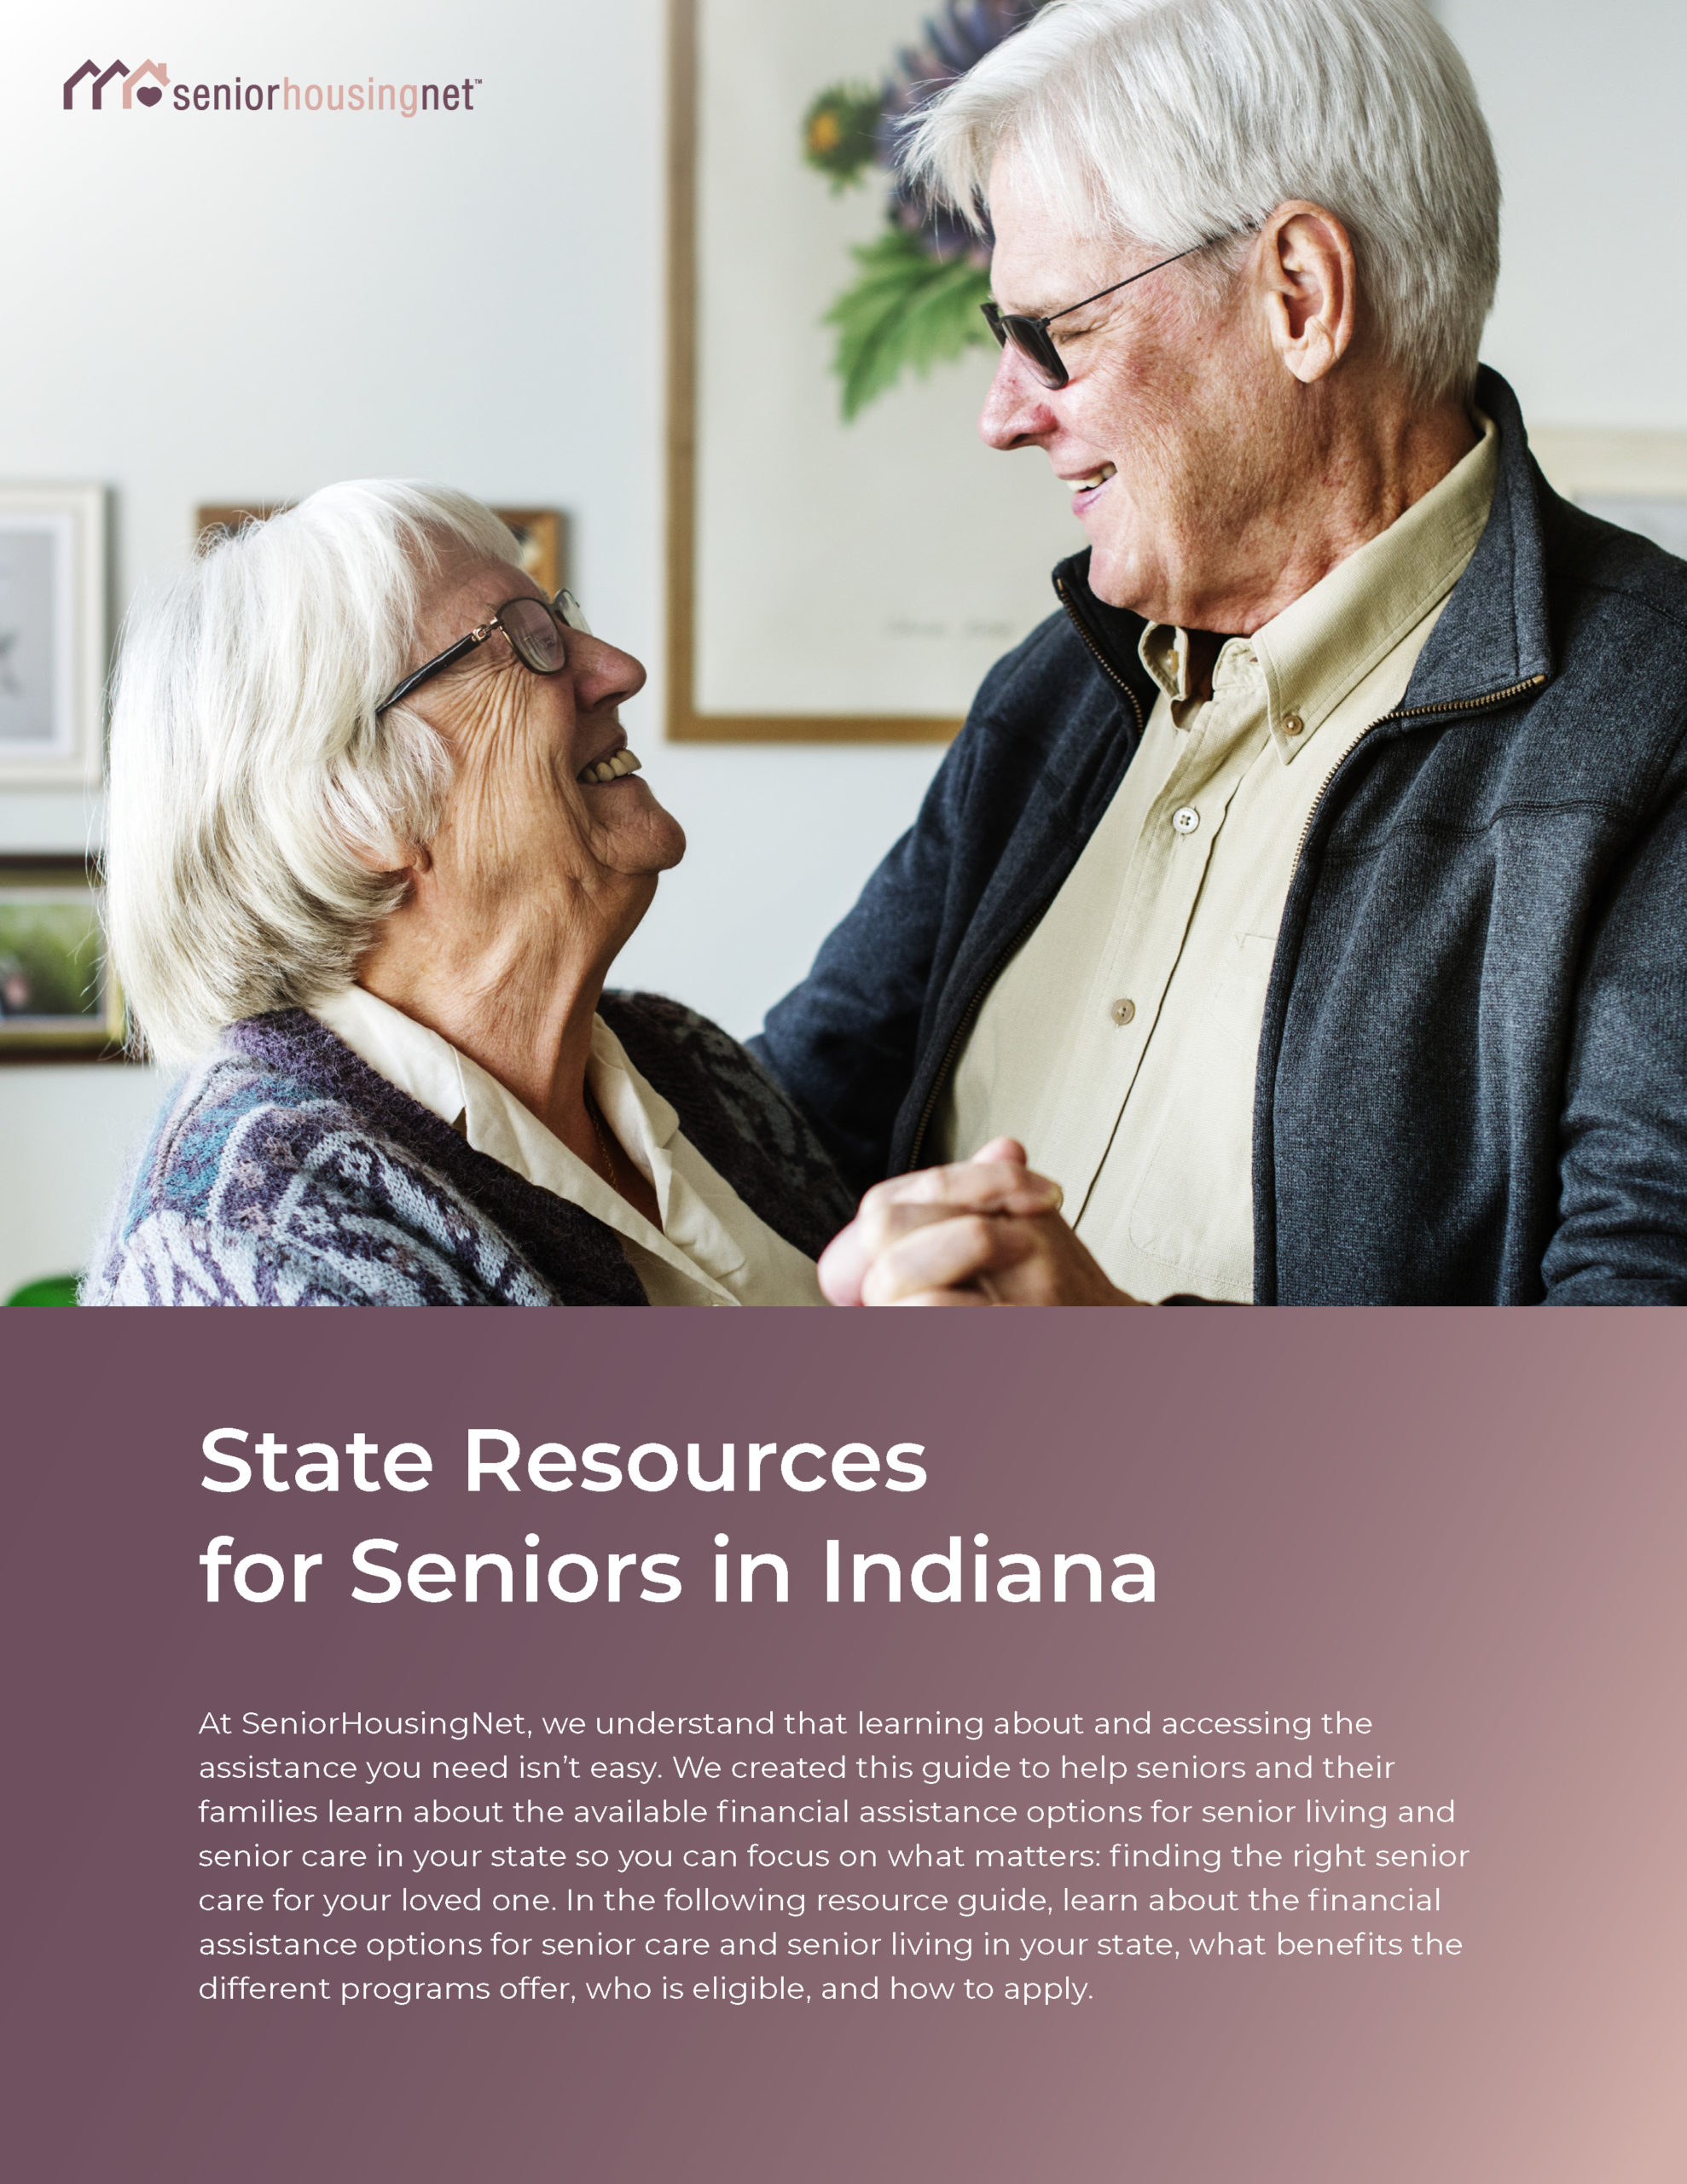 State Resources for Seniors in Indiana